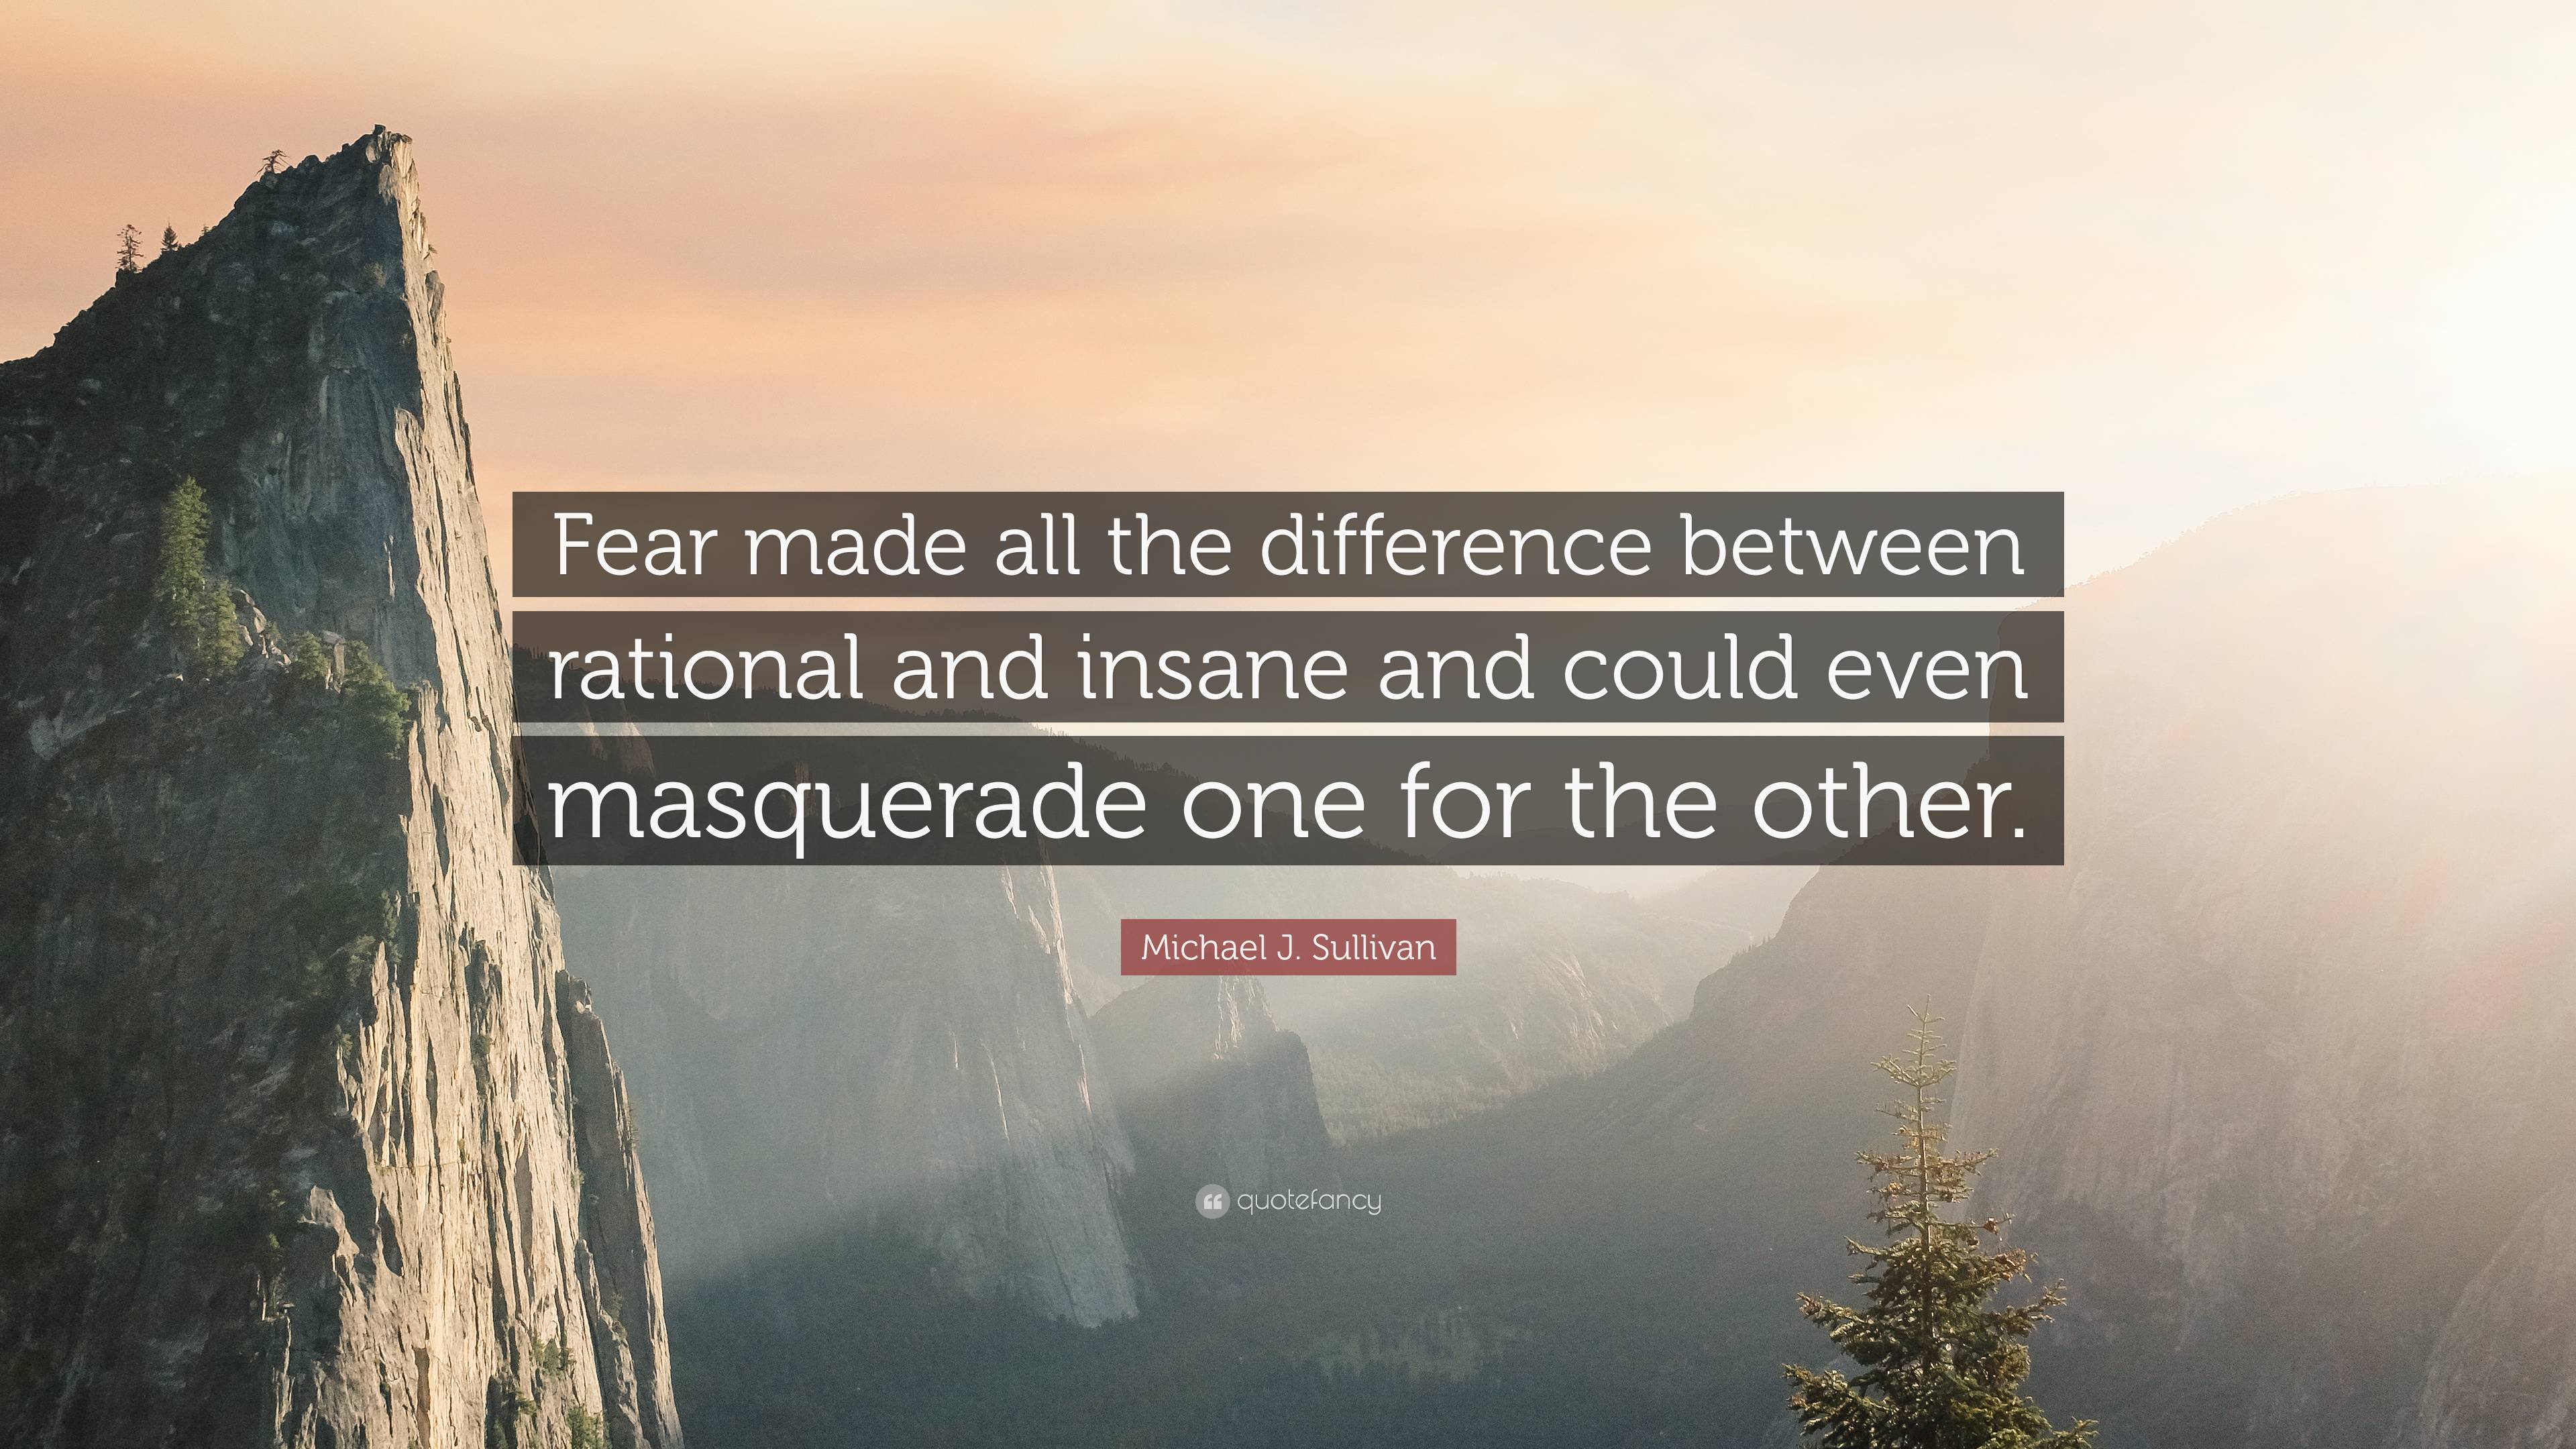 Michael J. Sullivan Quote: “Fear made all the difference between rational and  insane and could even